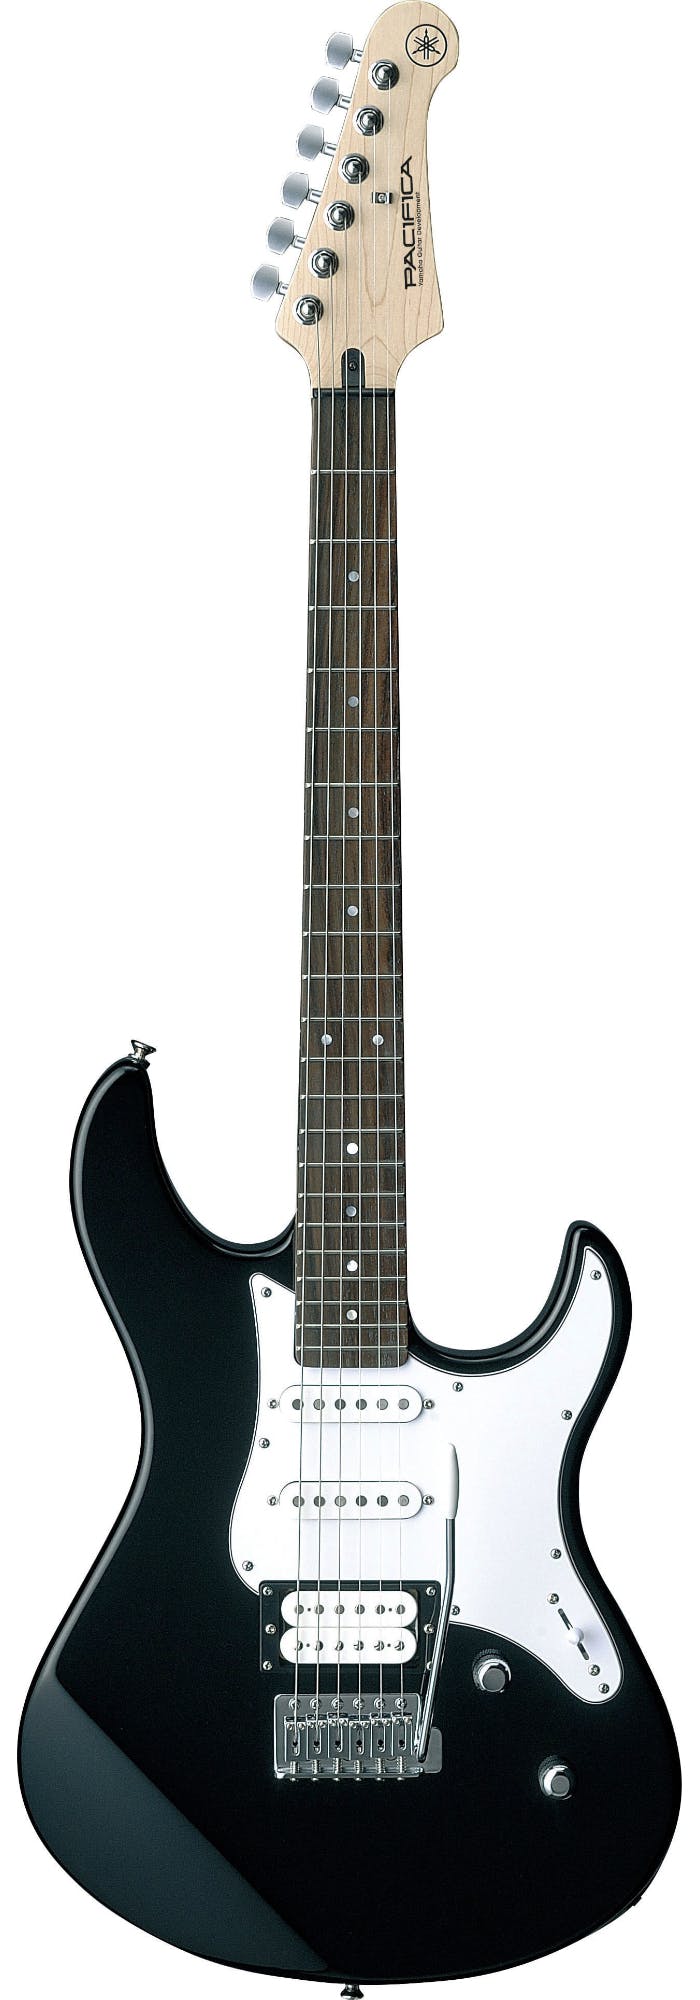 Yamaha Pacifica 112V Electric Guitar in Black - Andertons Music Co.